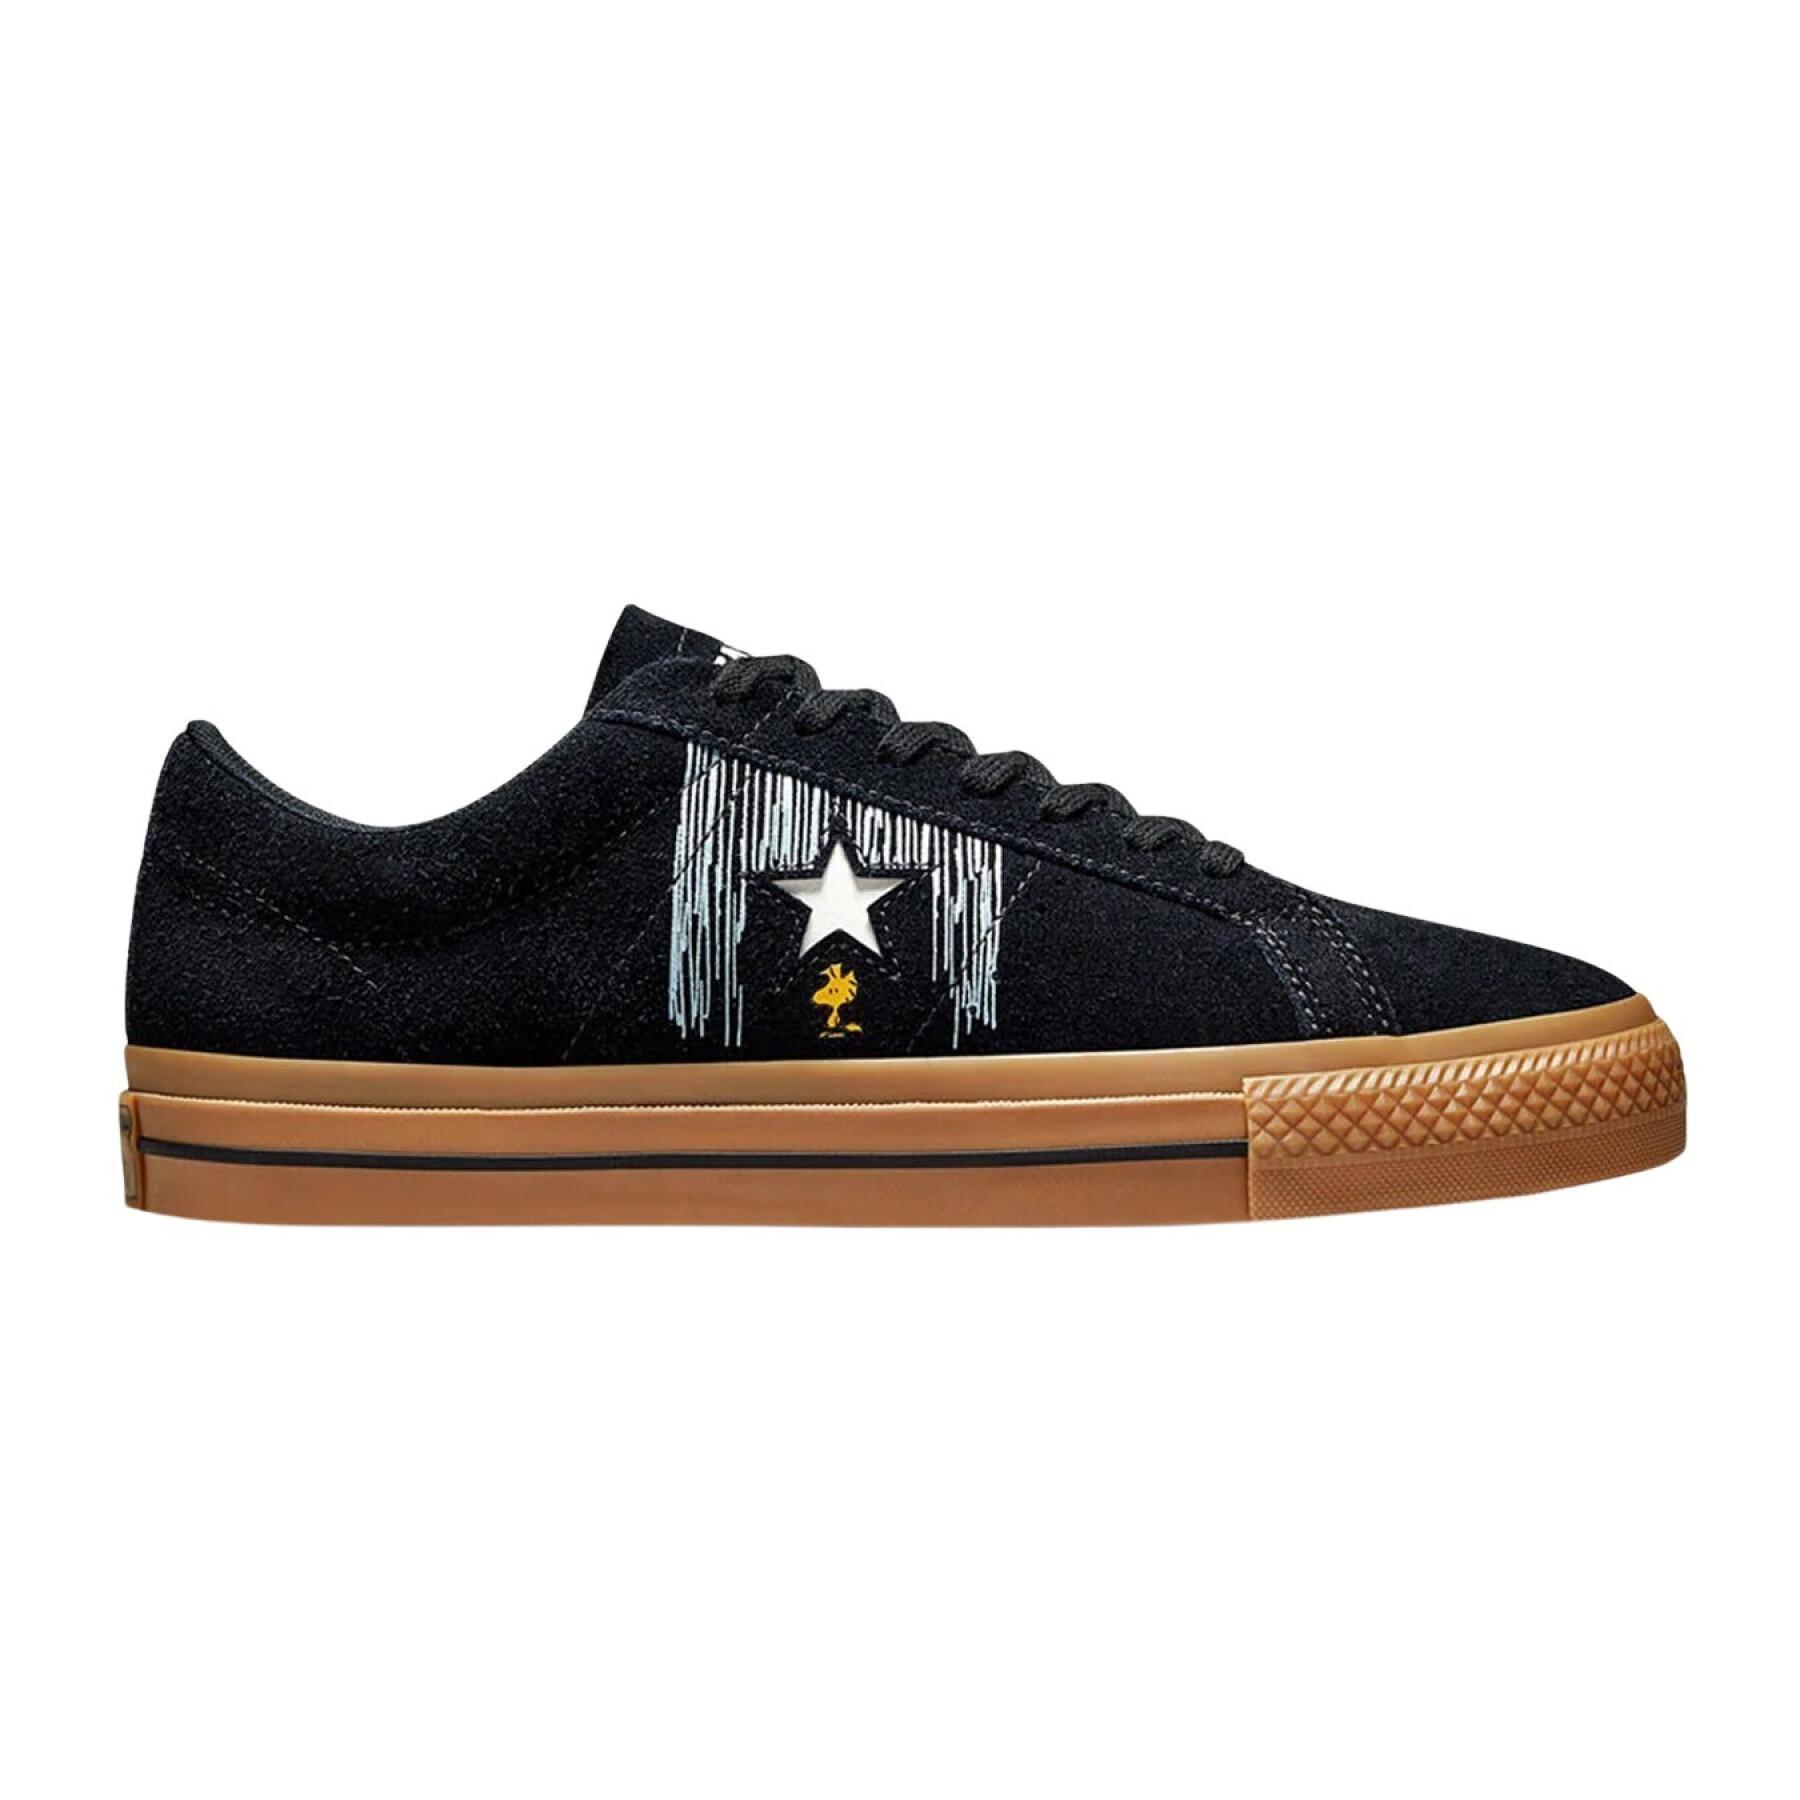 Formadores Converse X Peanuts One Star